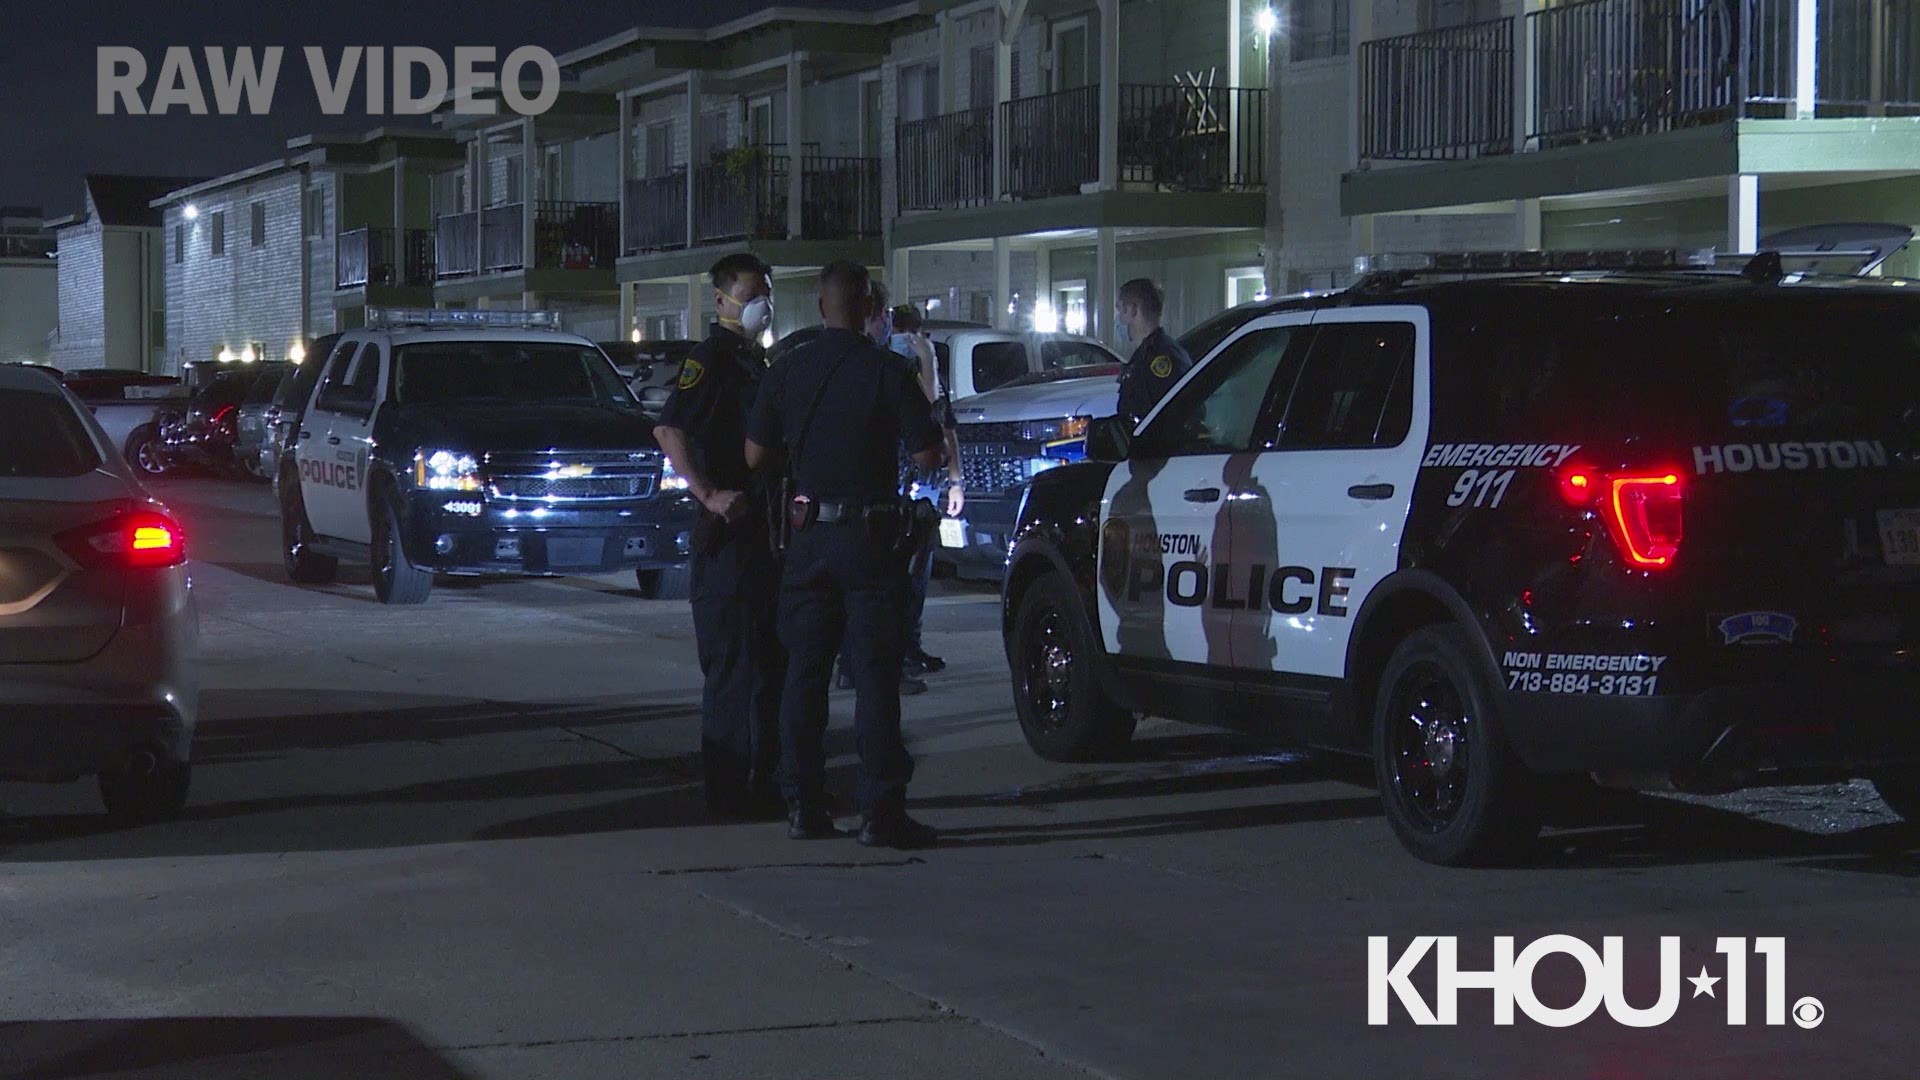 HPD investigating shooting that left a young man dead at southwest Houston apartment complex.